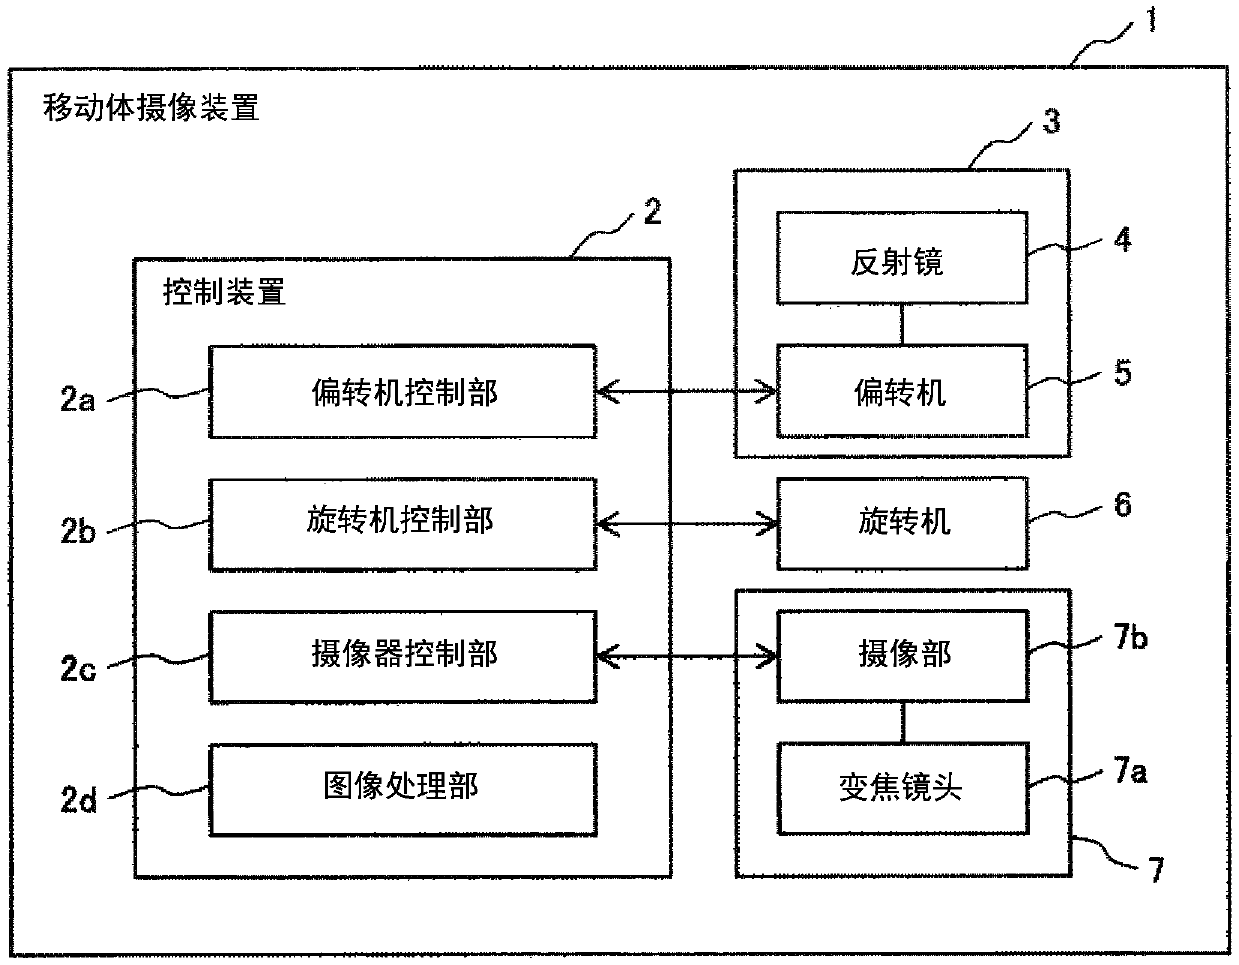 Moving object imaging apparatus and moving object imaging method